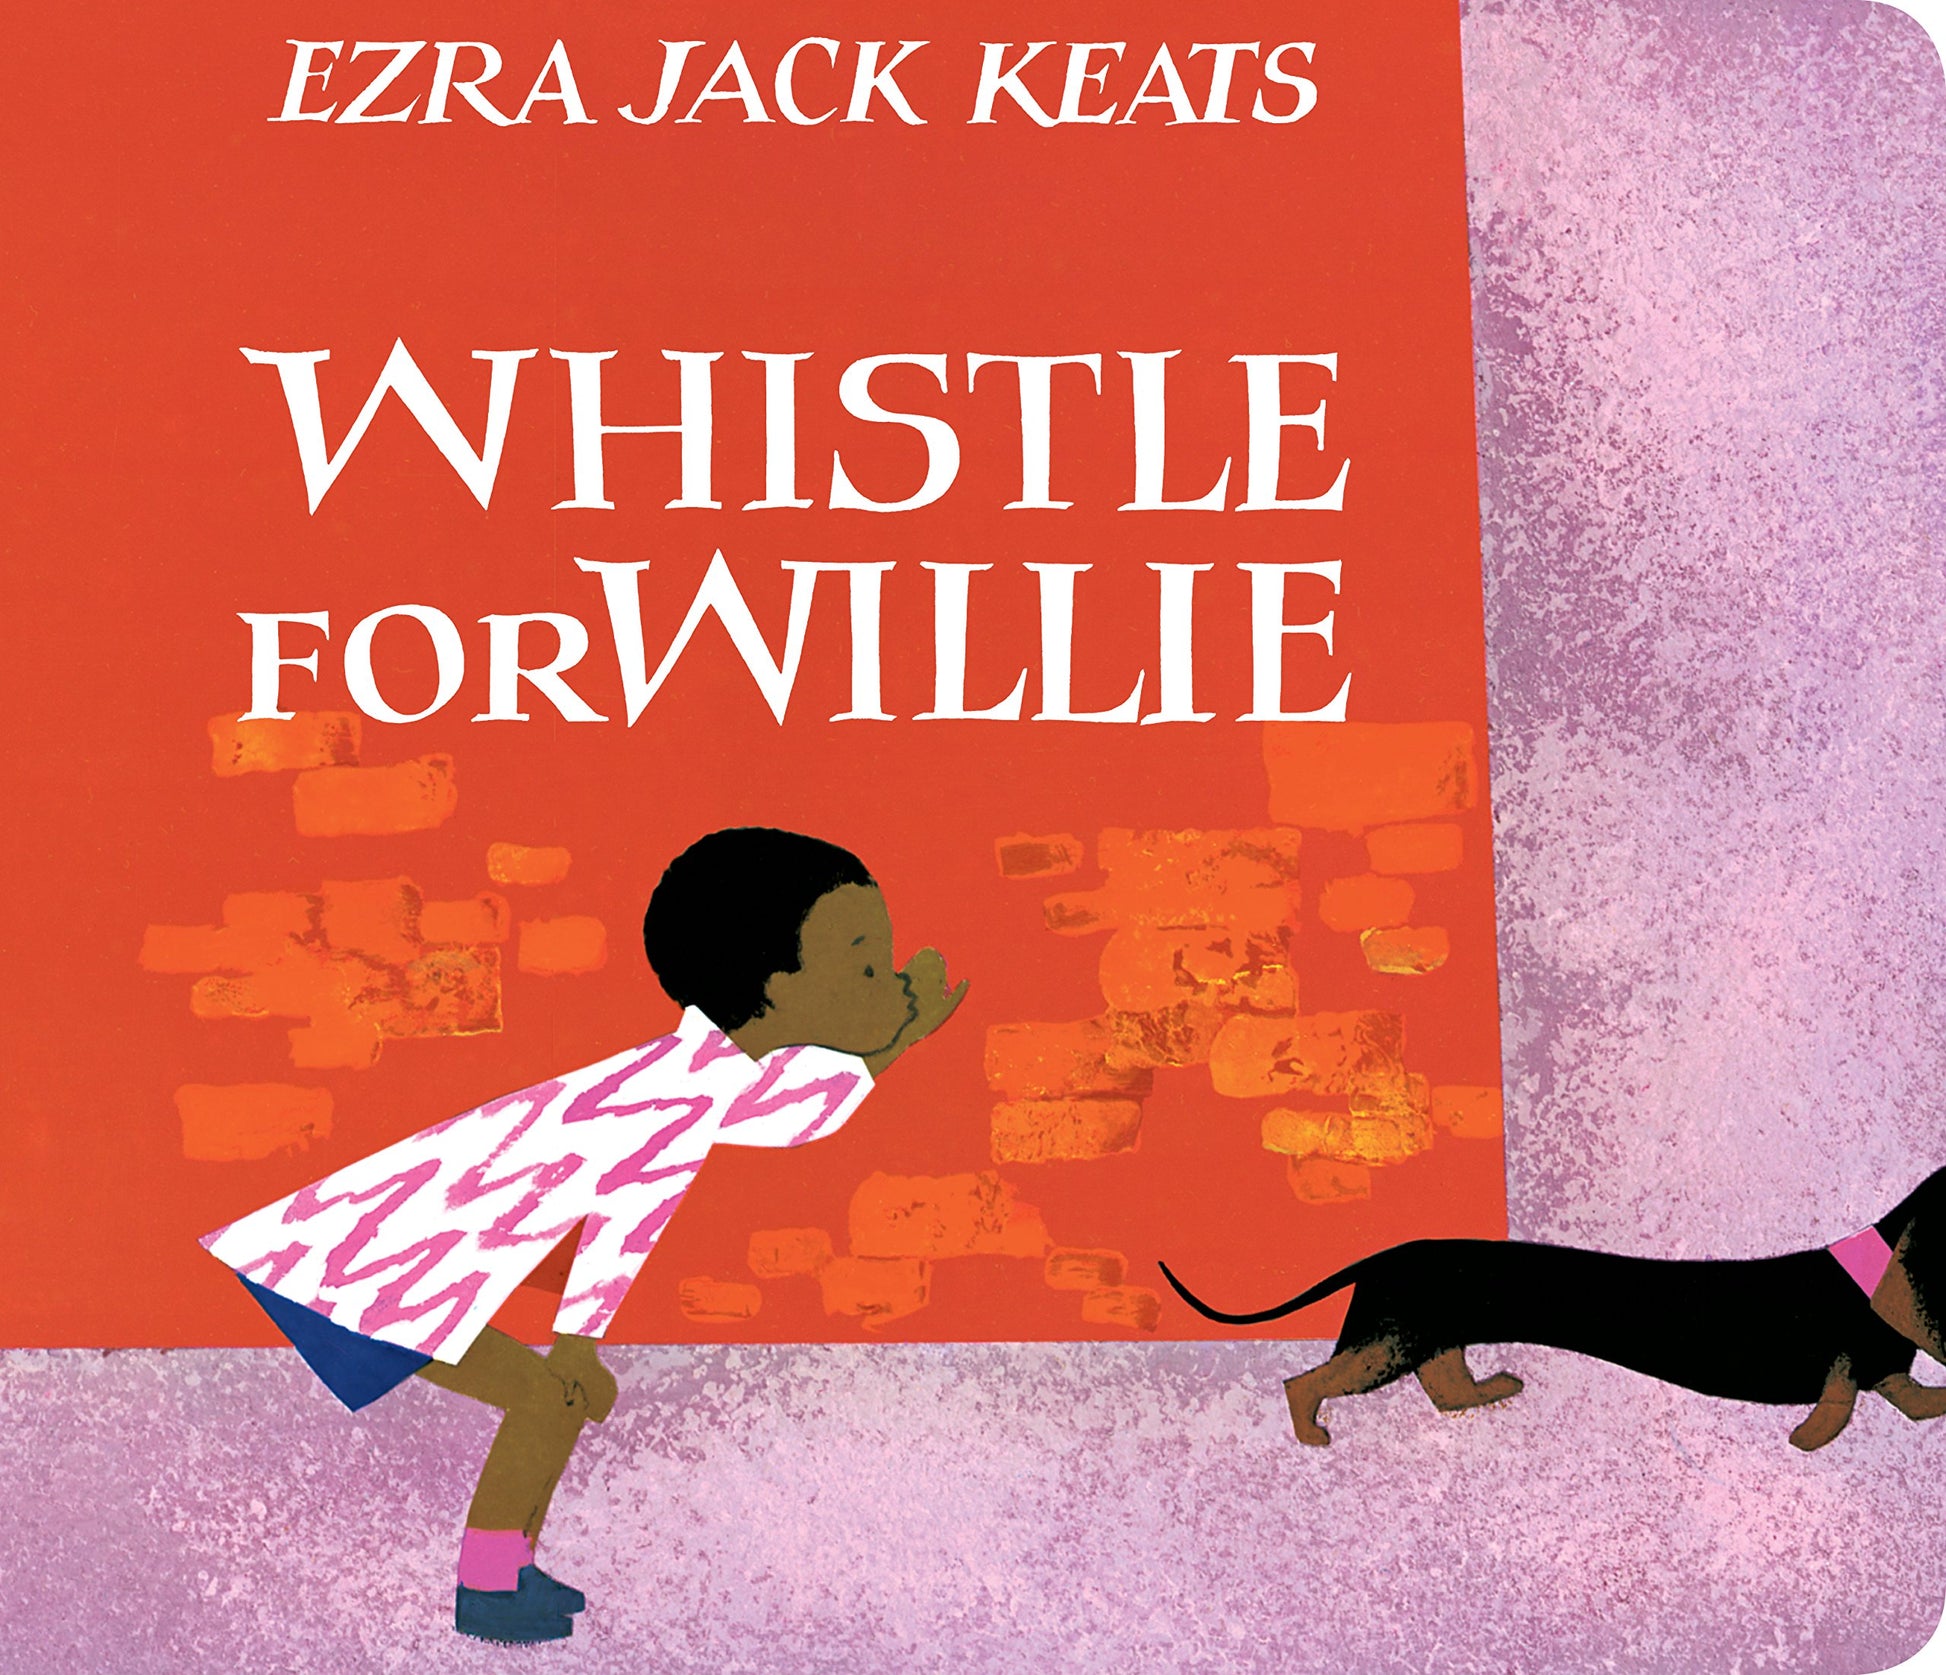 cover of book with illustration of a child whistling at a dog, title, and authors name